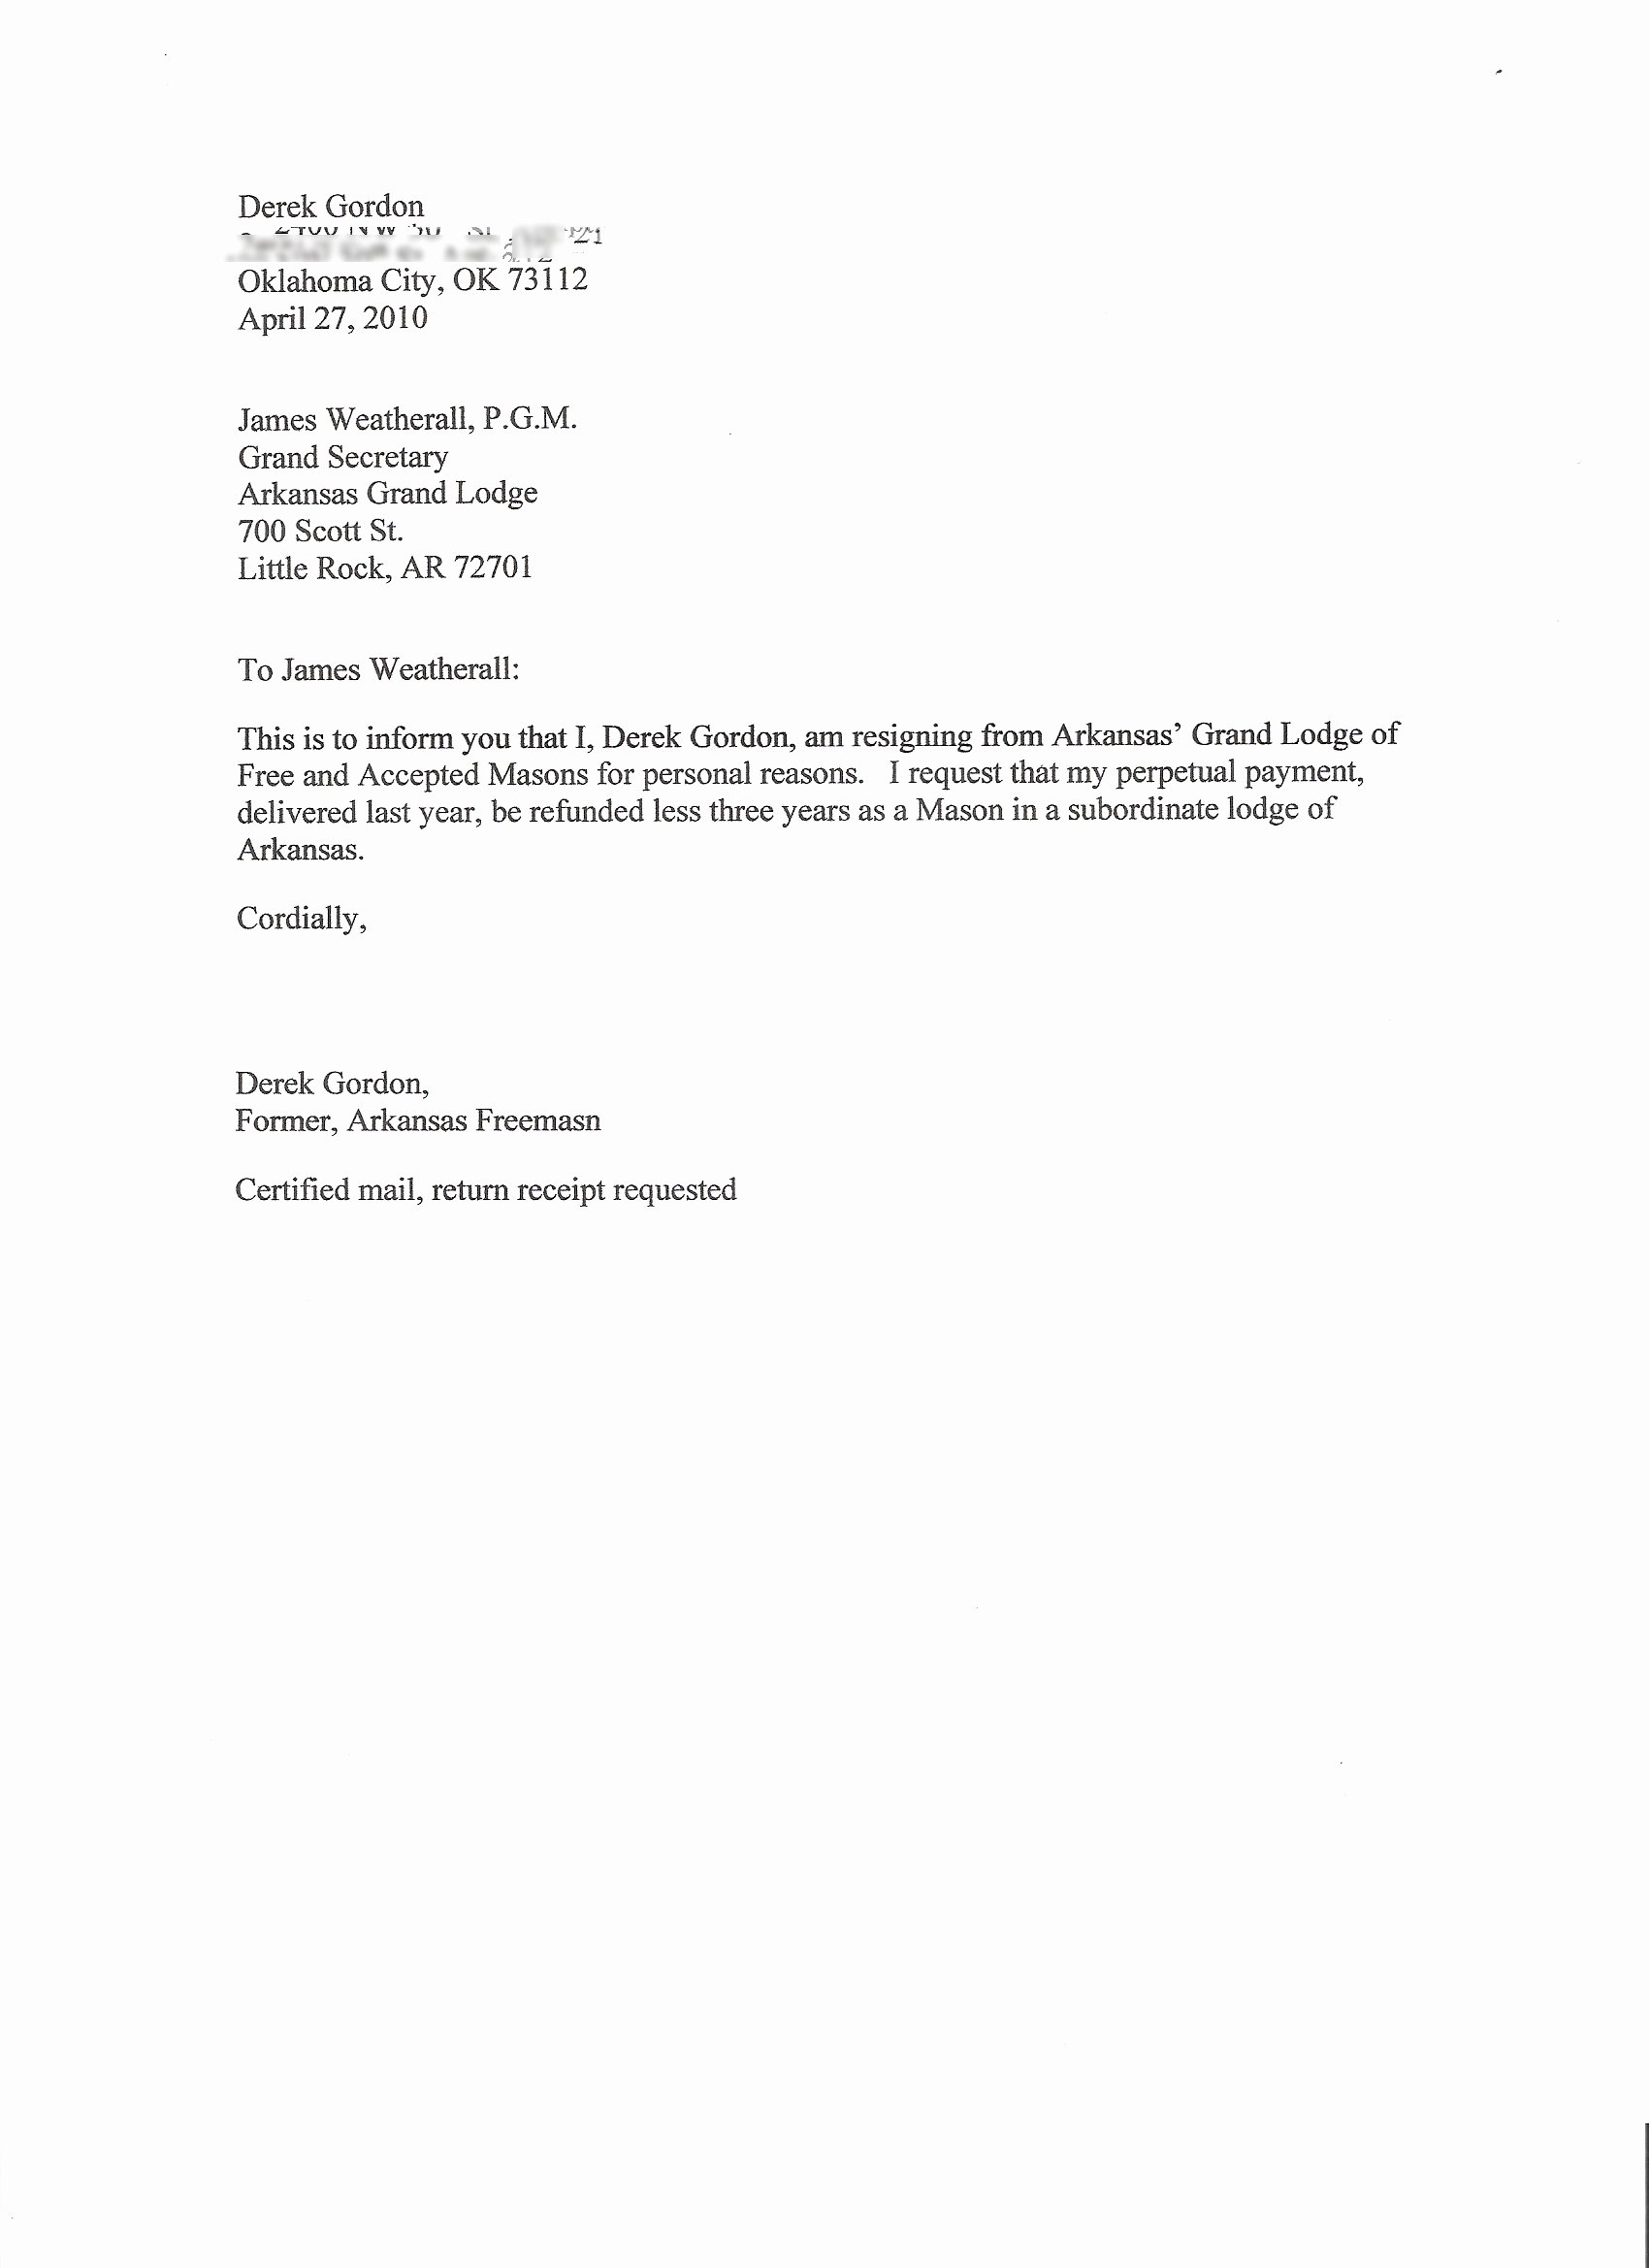 Resignation Letter Sample Template Beautiful Dos and Don’ts for A Resignation Letter